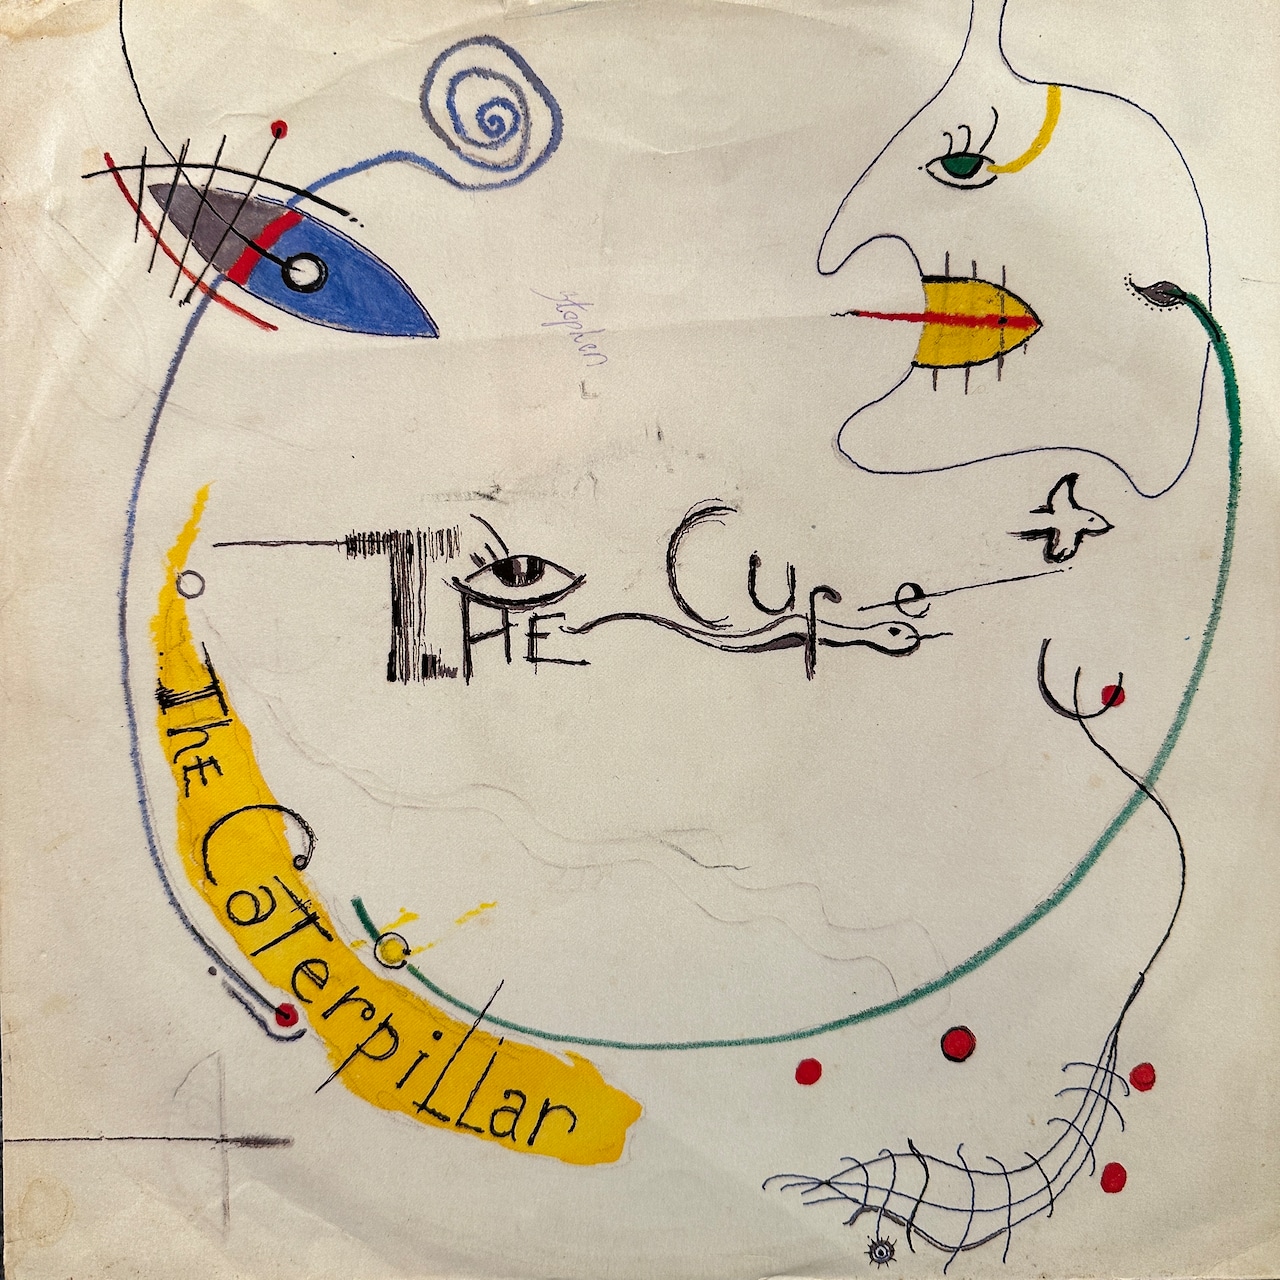 【12INCH】THE CURE/The Caterpillar